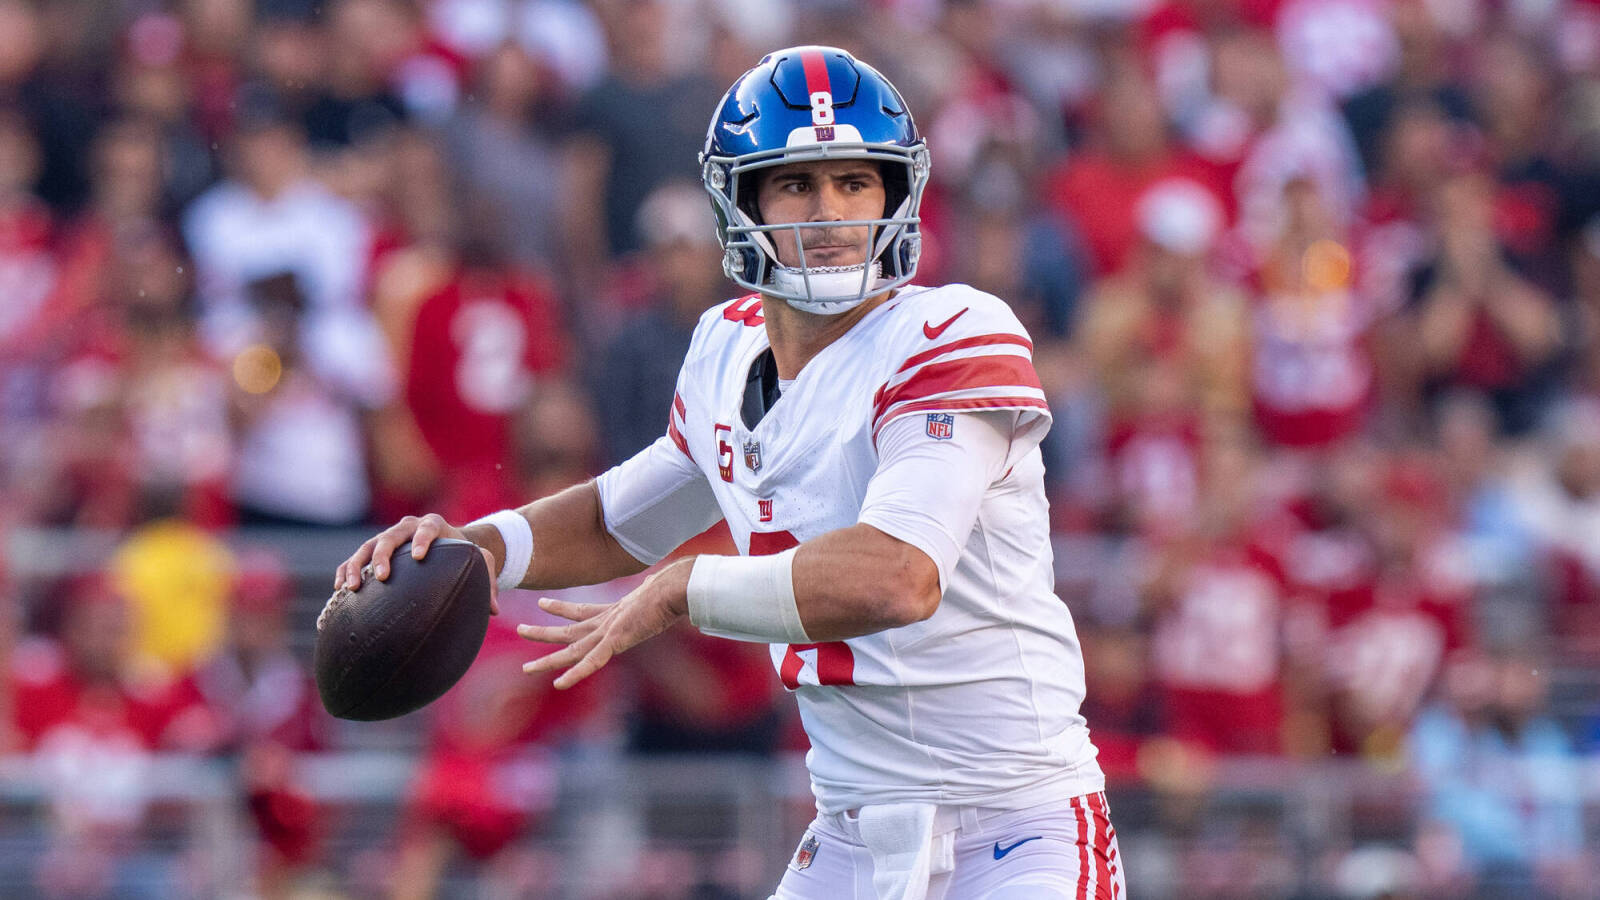 Fantasy futures: Where to draft your favorite New York Giants